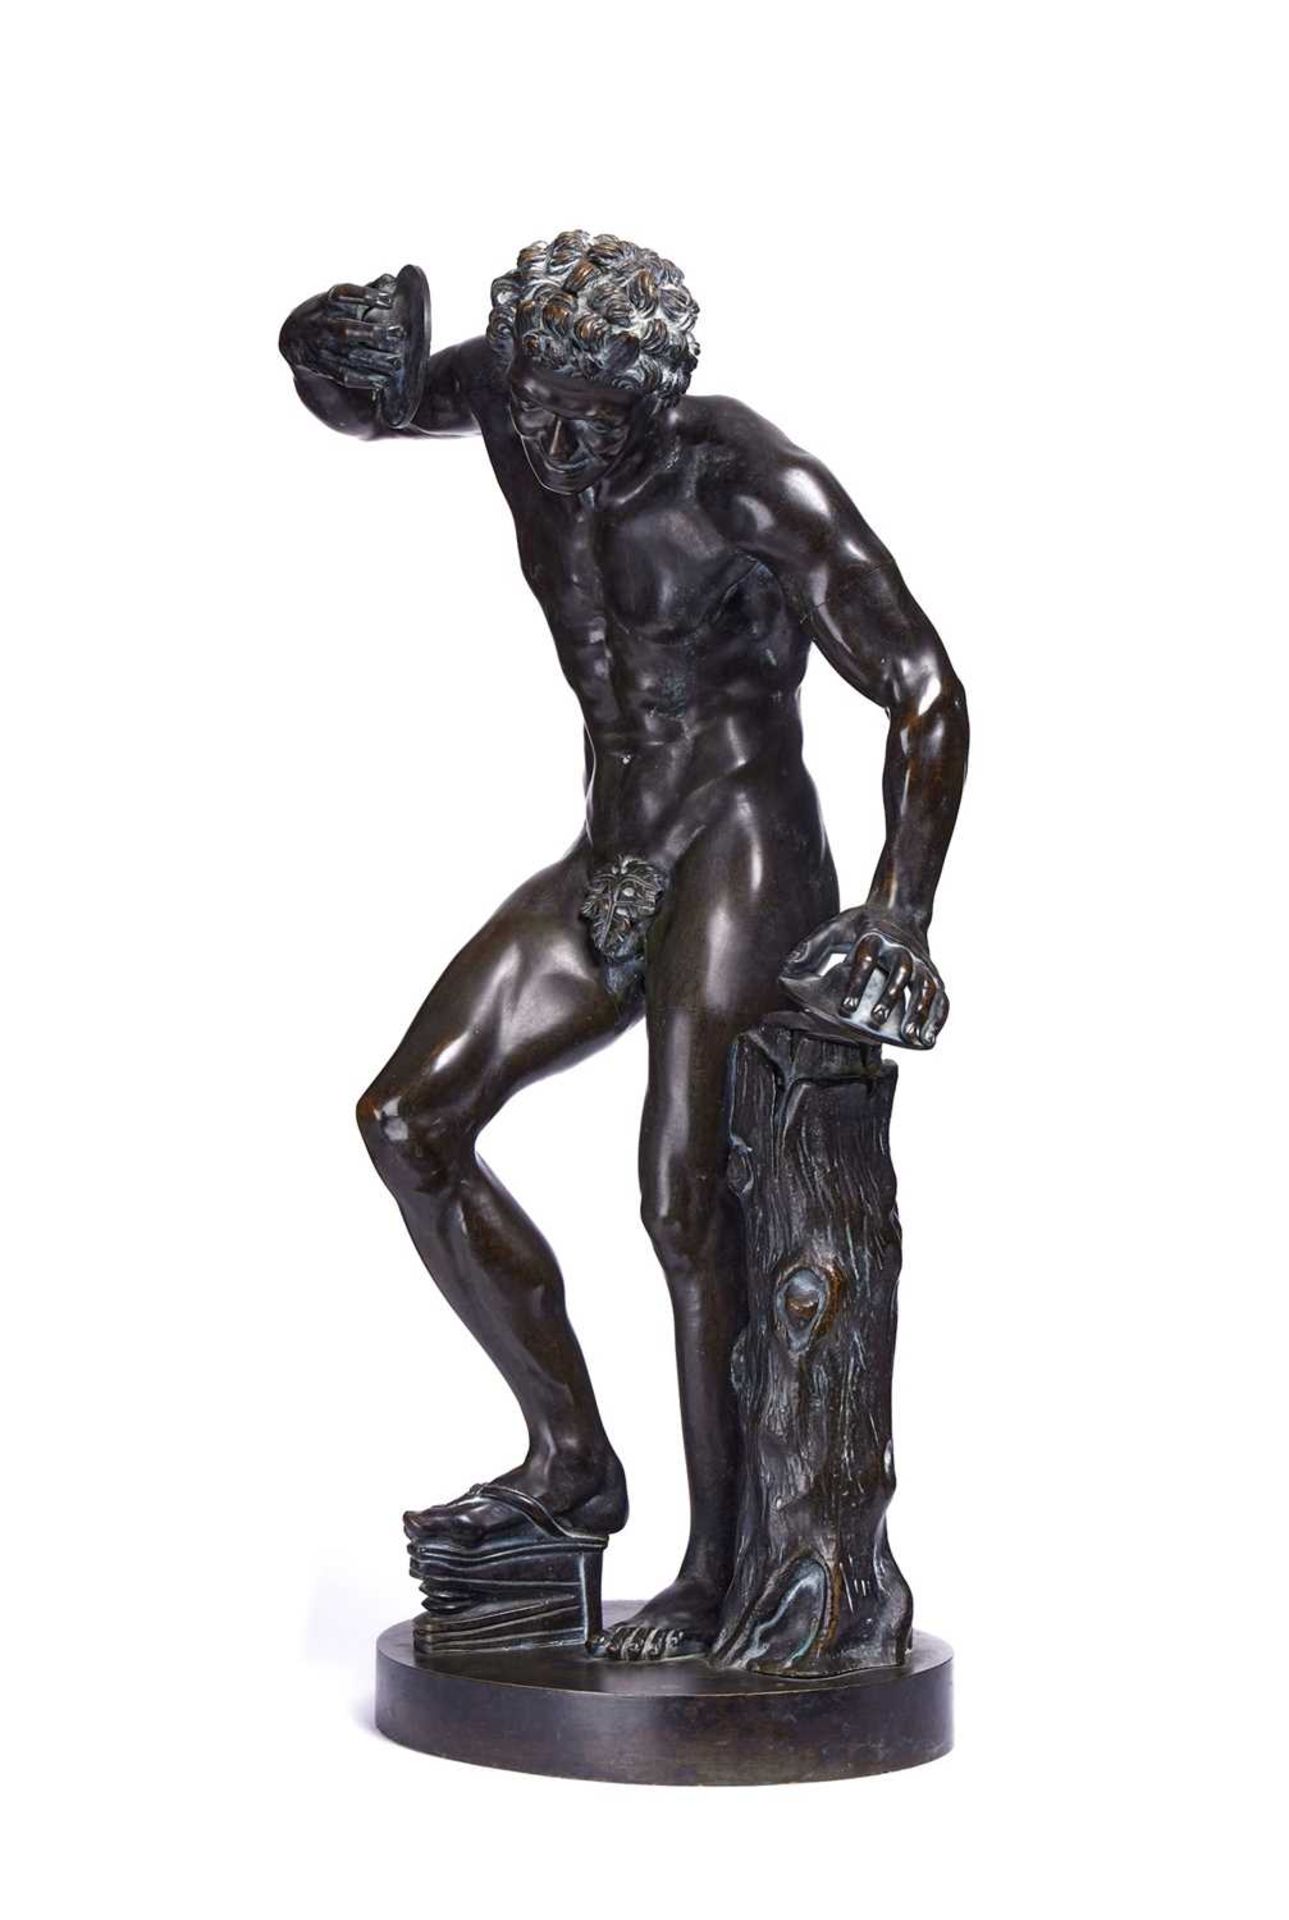 AFTER THE ANTIQUE: A 19TH CENTURY BRONZE OF THE DANCING FAUN WITH CYMBALS - Image 3 of 9